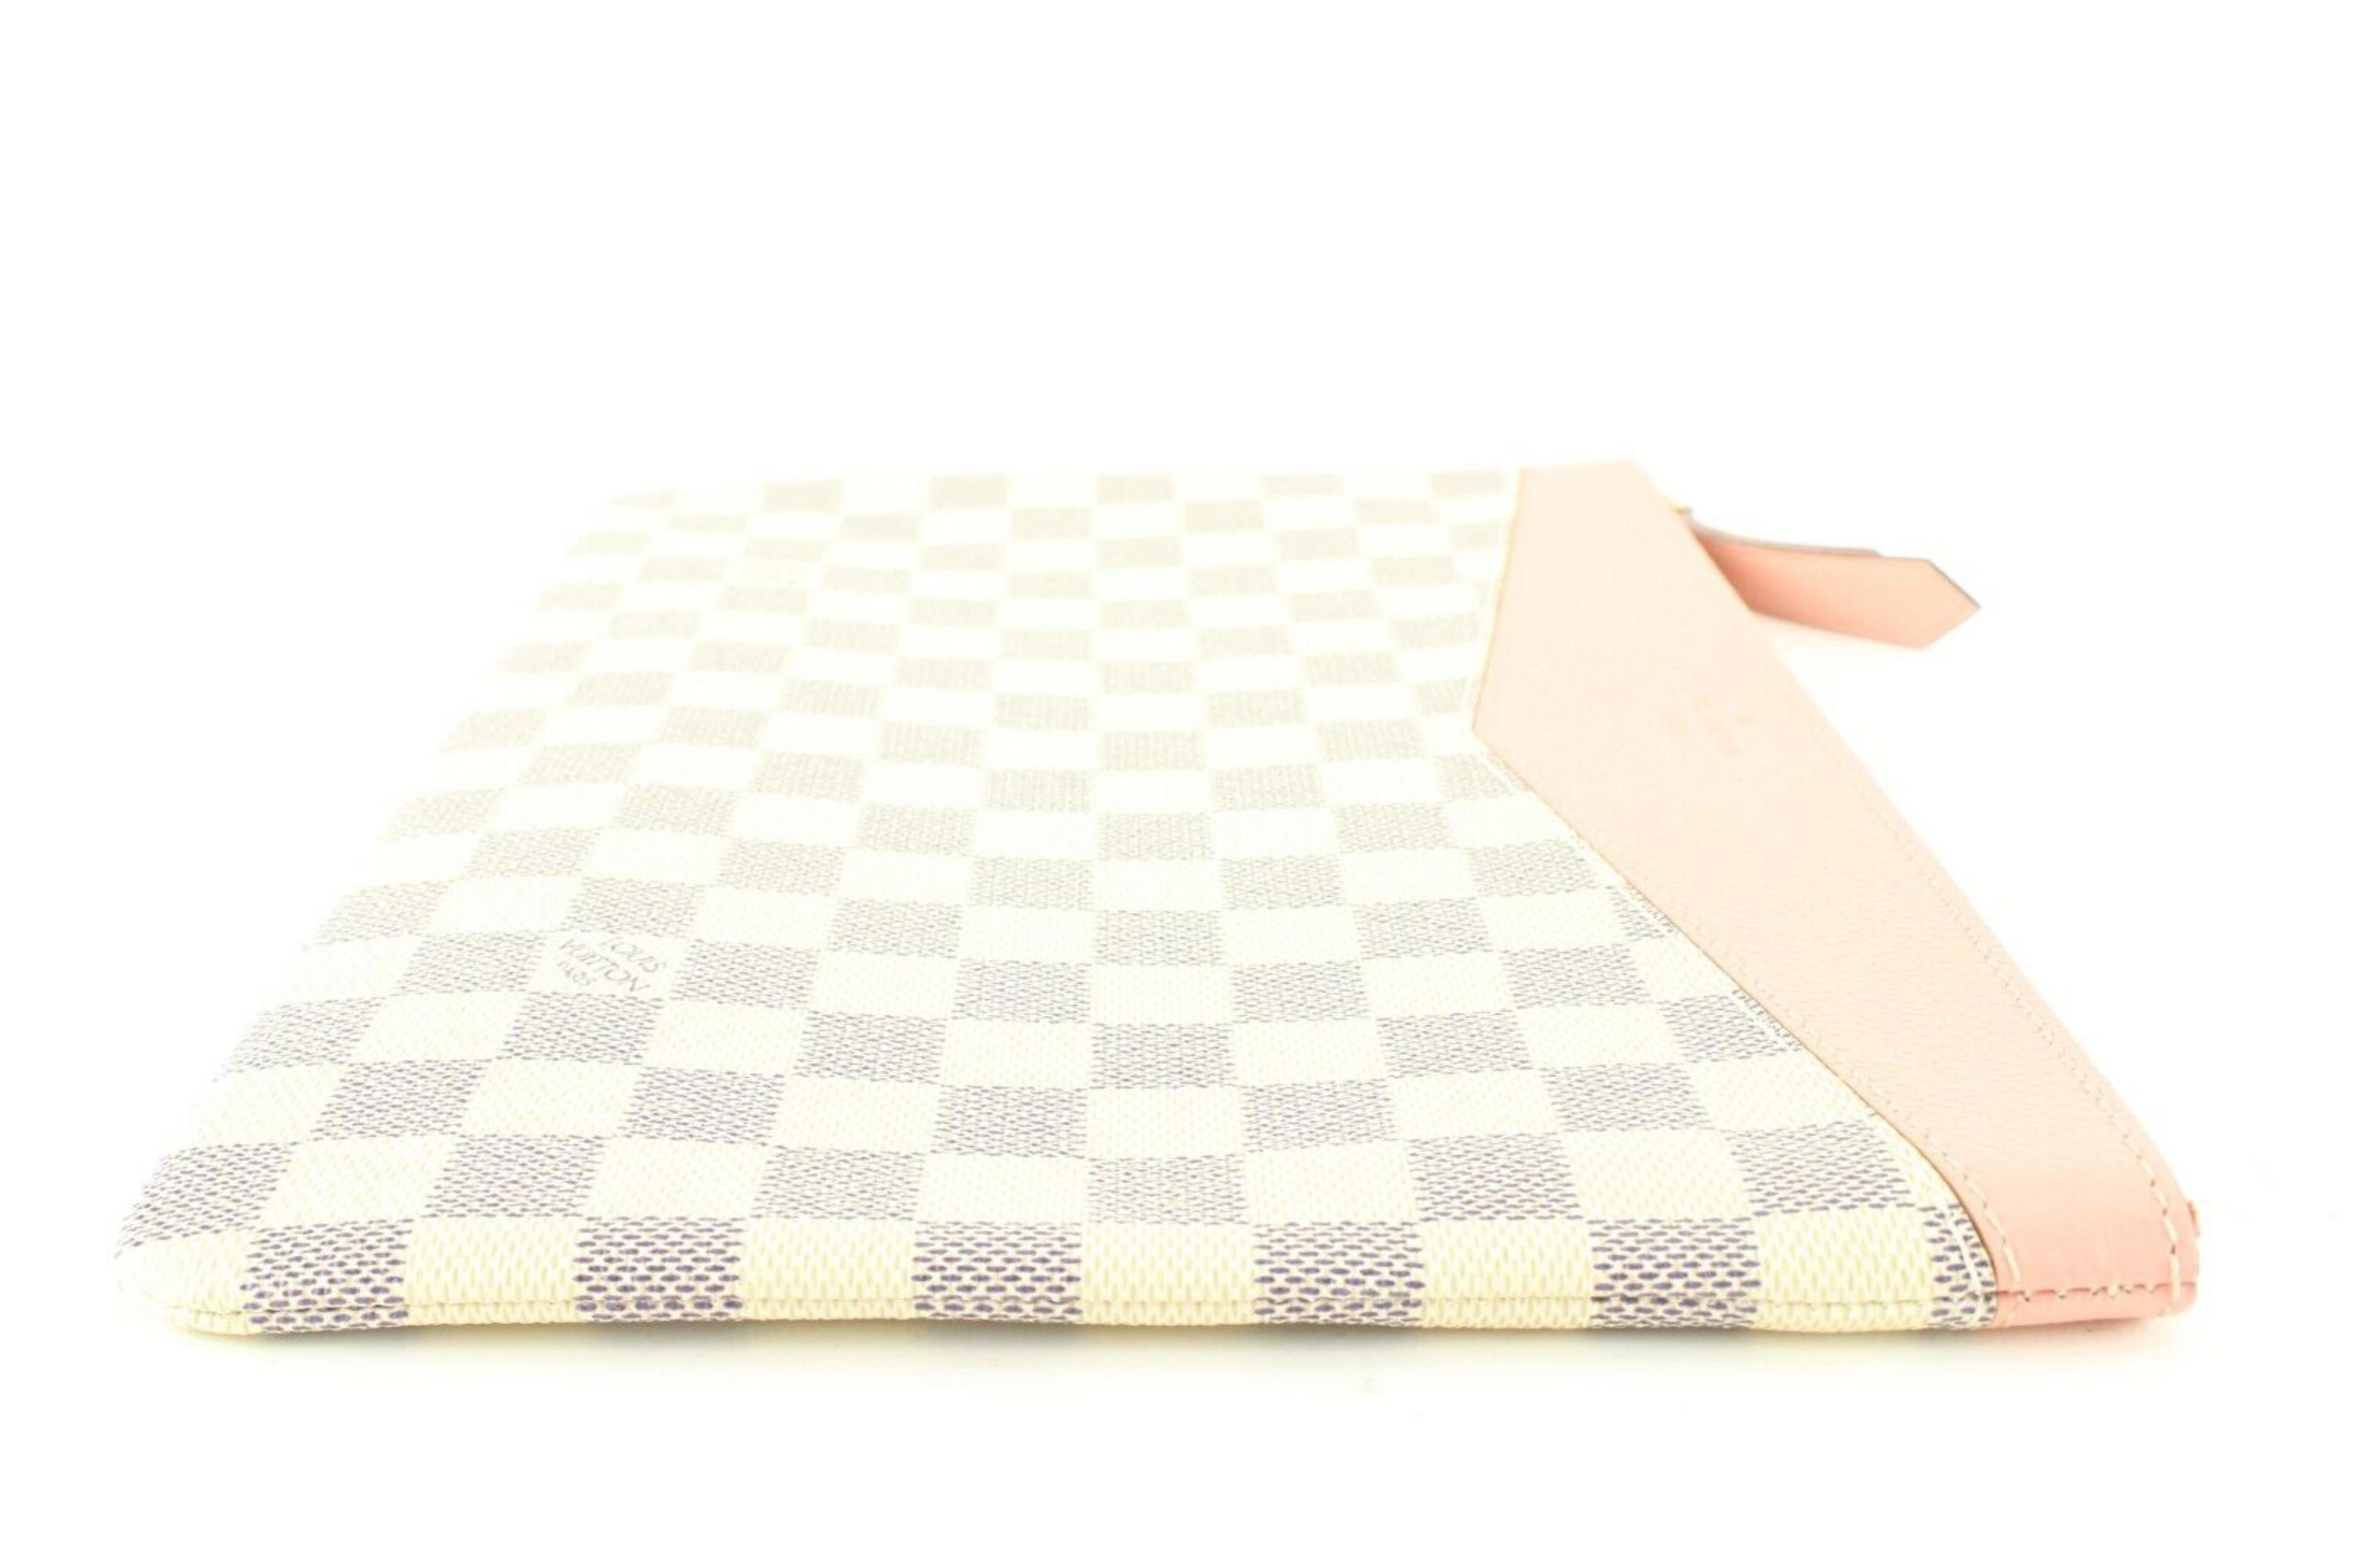 Louis Vuitton Damier Azur Pink Daily Pouch Zip Porfolio Clutch 8LU0224 In New Condition For Sale In Dix hills, NY